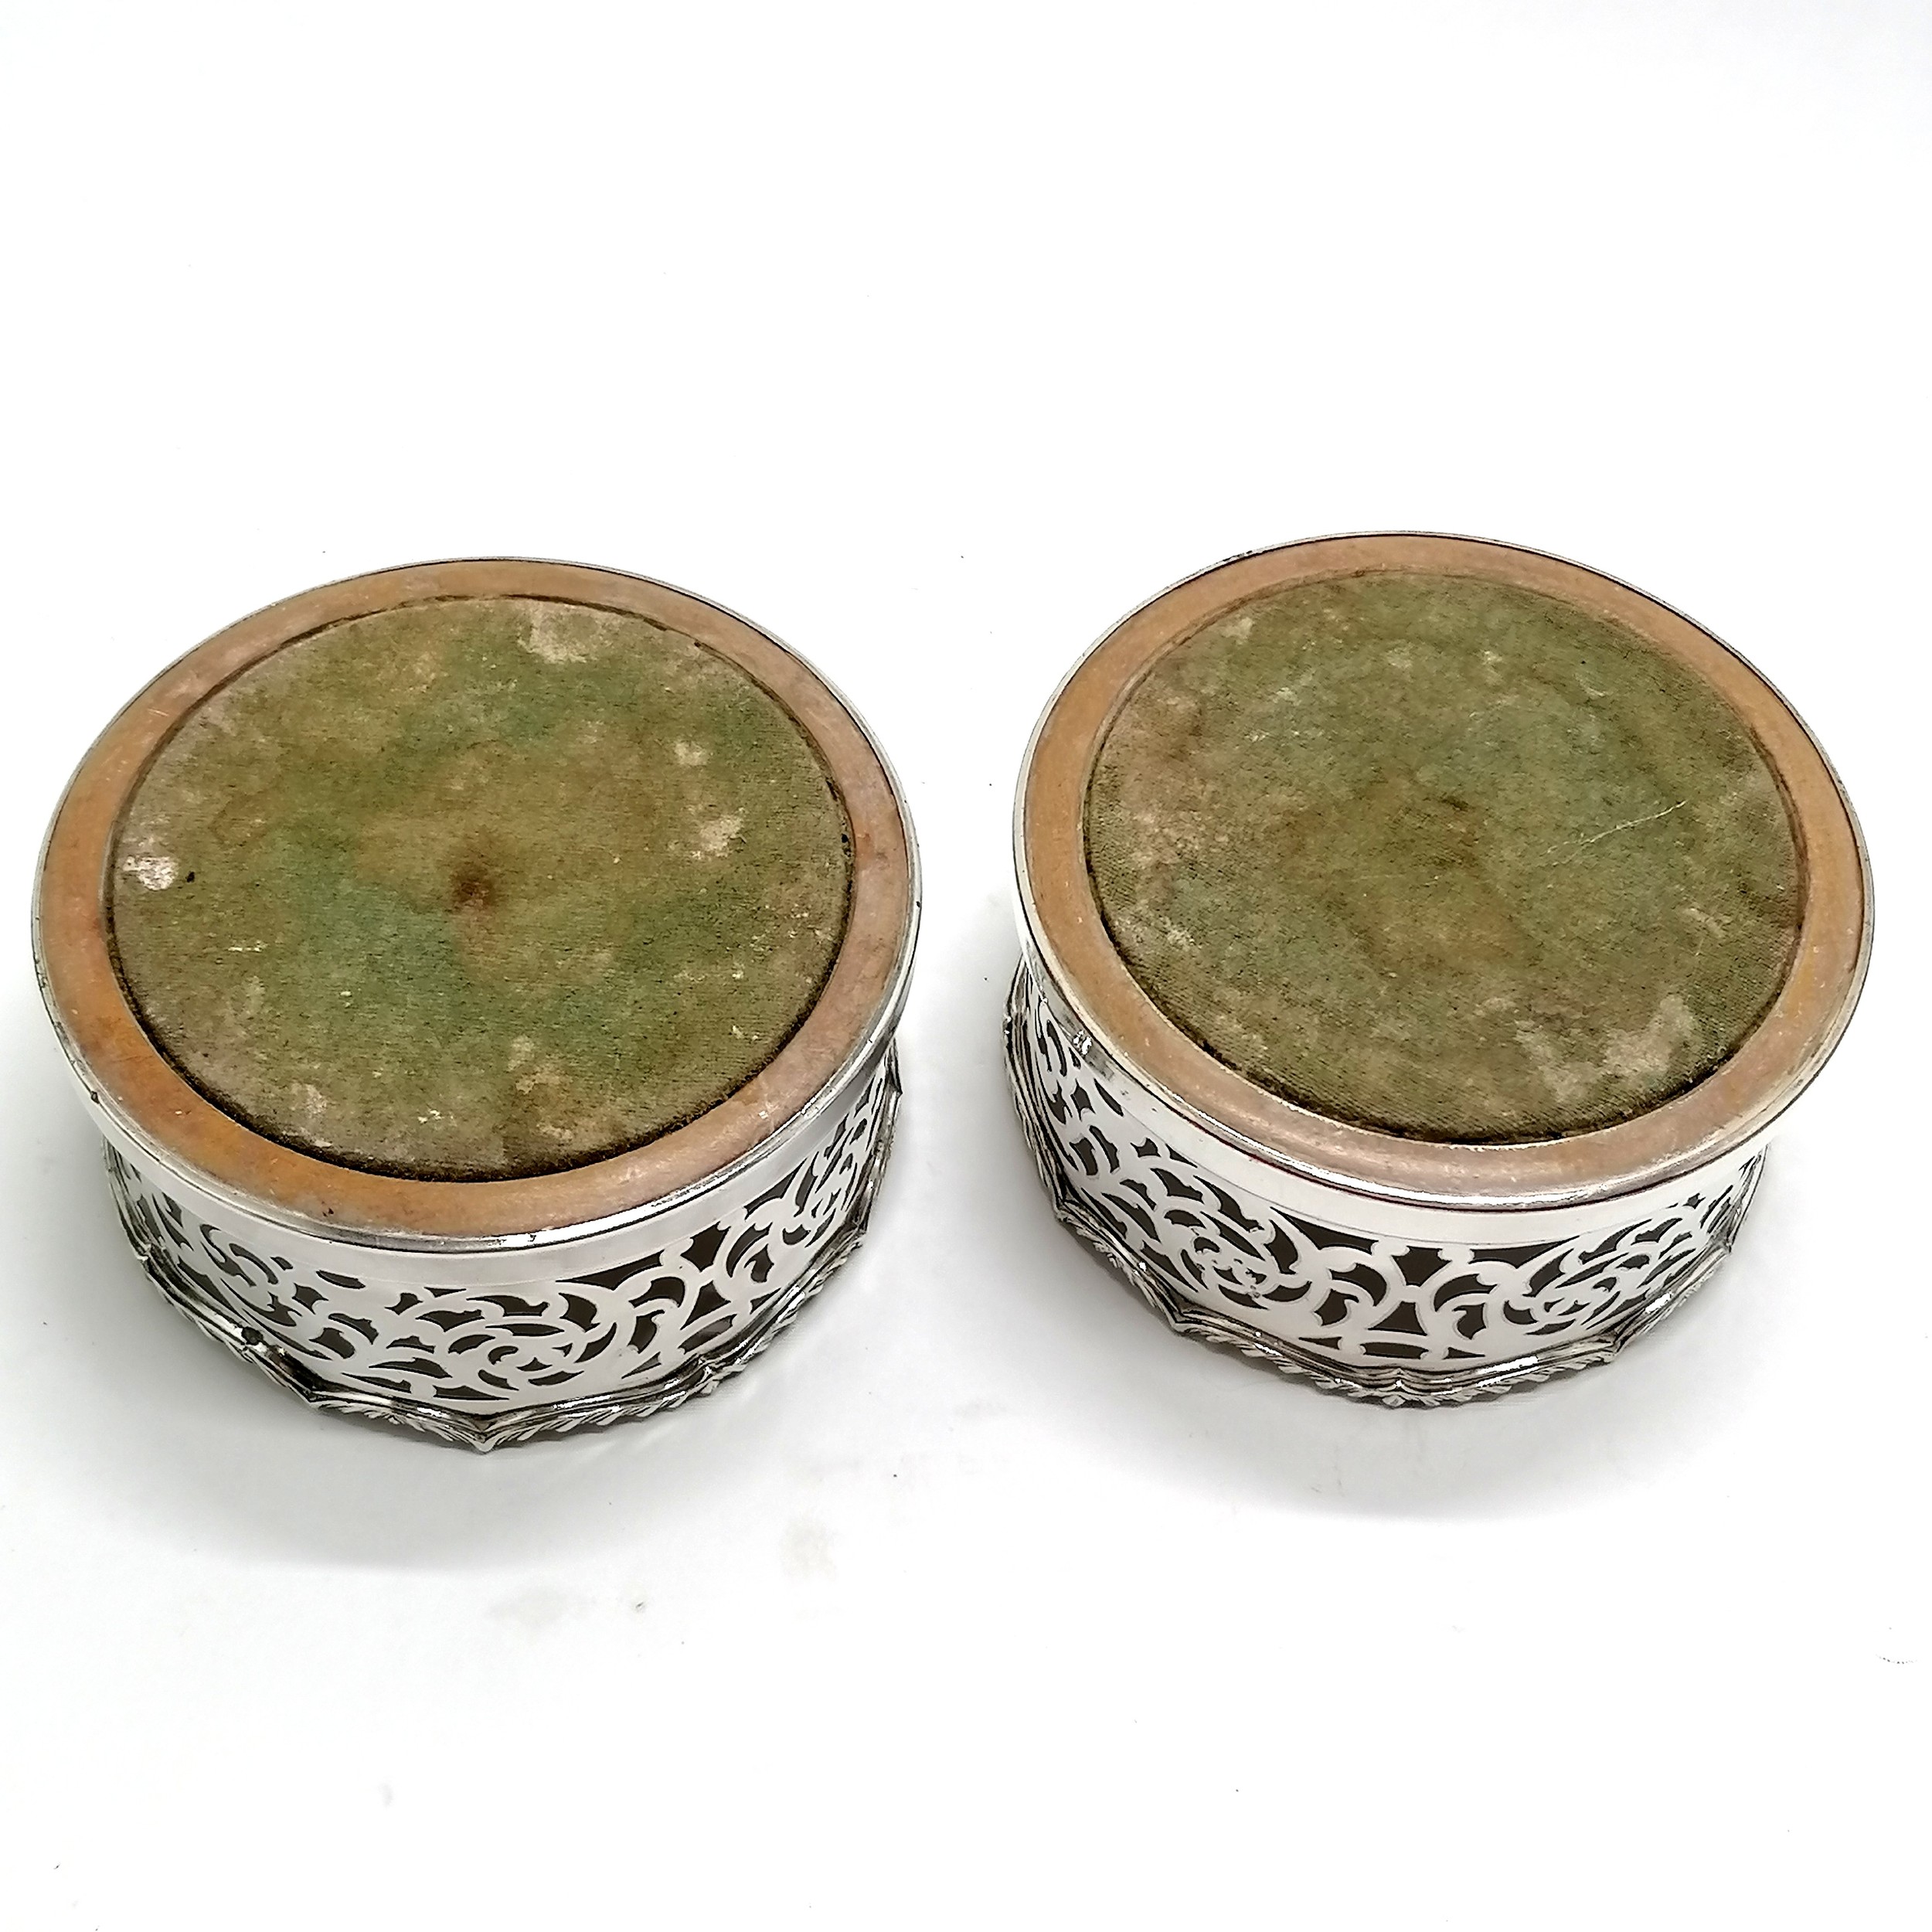 Pair of antique bottle coasters with turned wooden bases and high pierced gallery detail - 14cm - Image 2 of 5